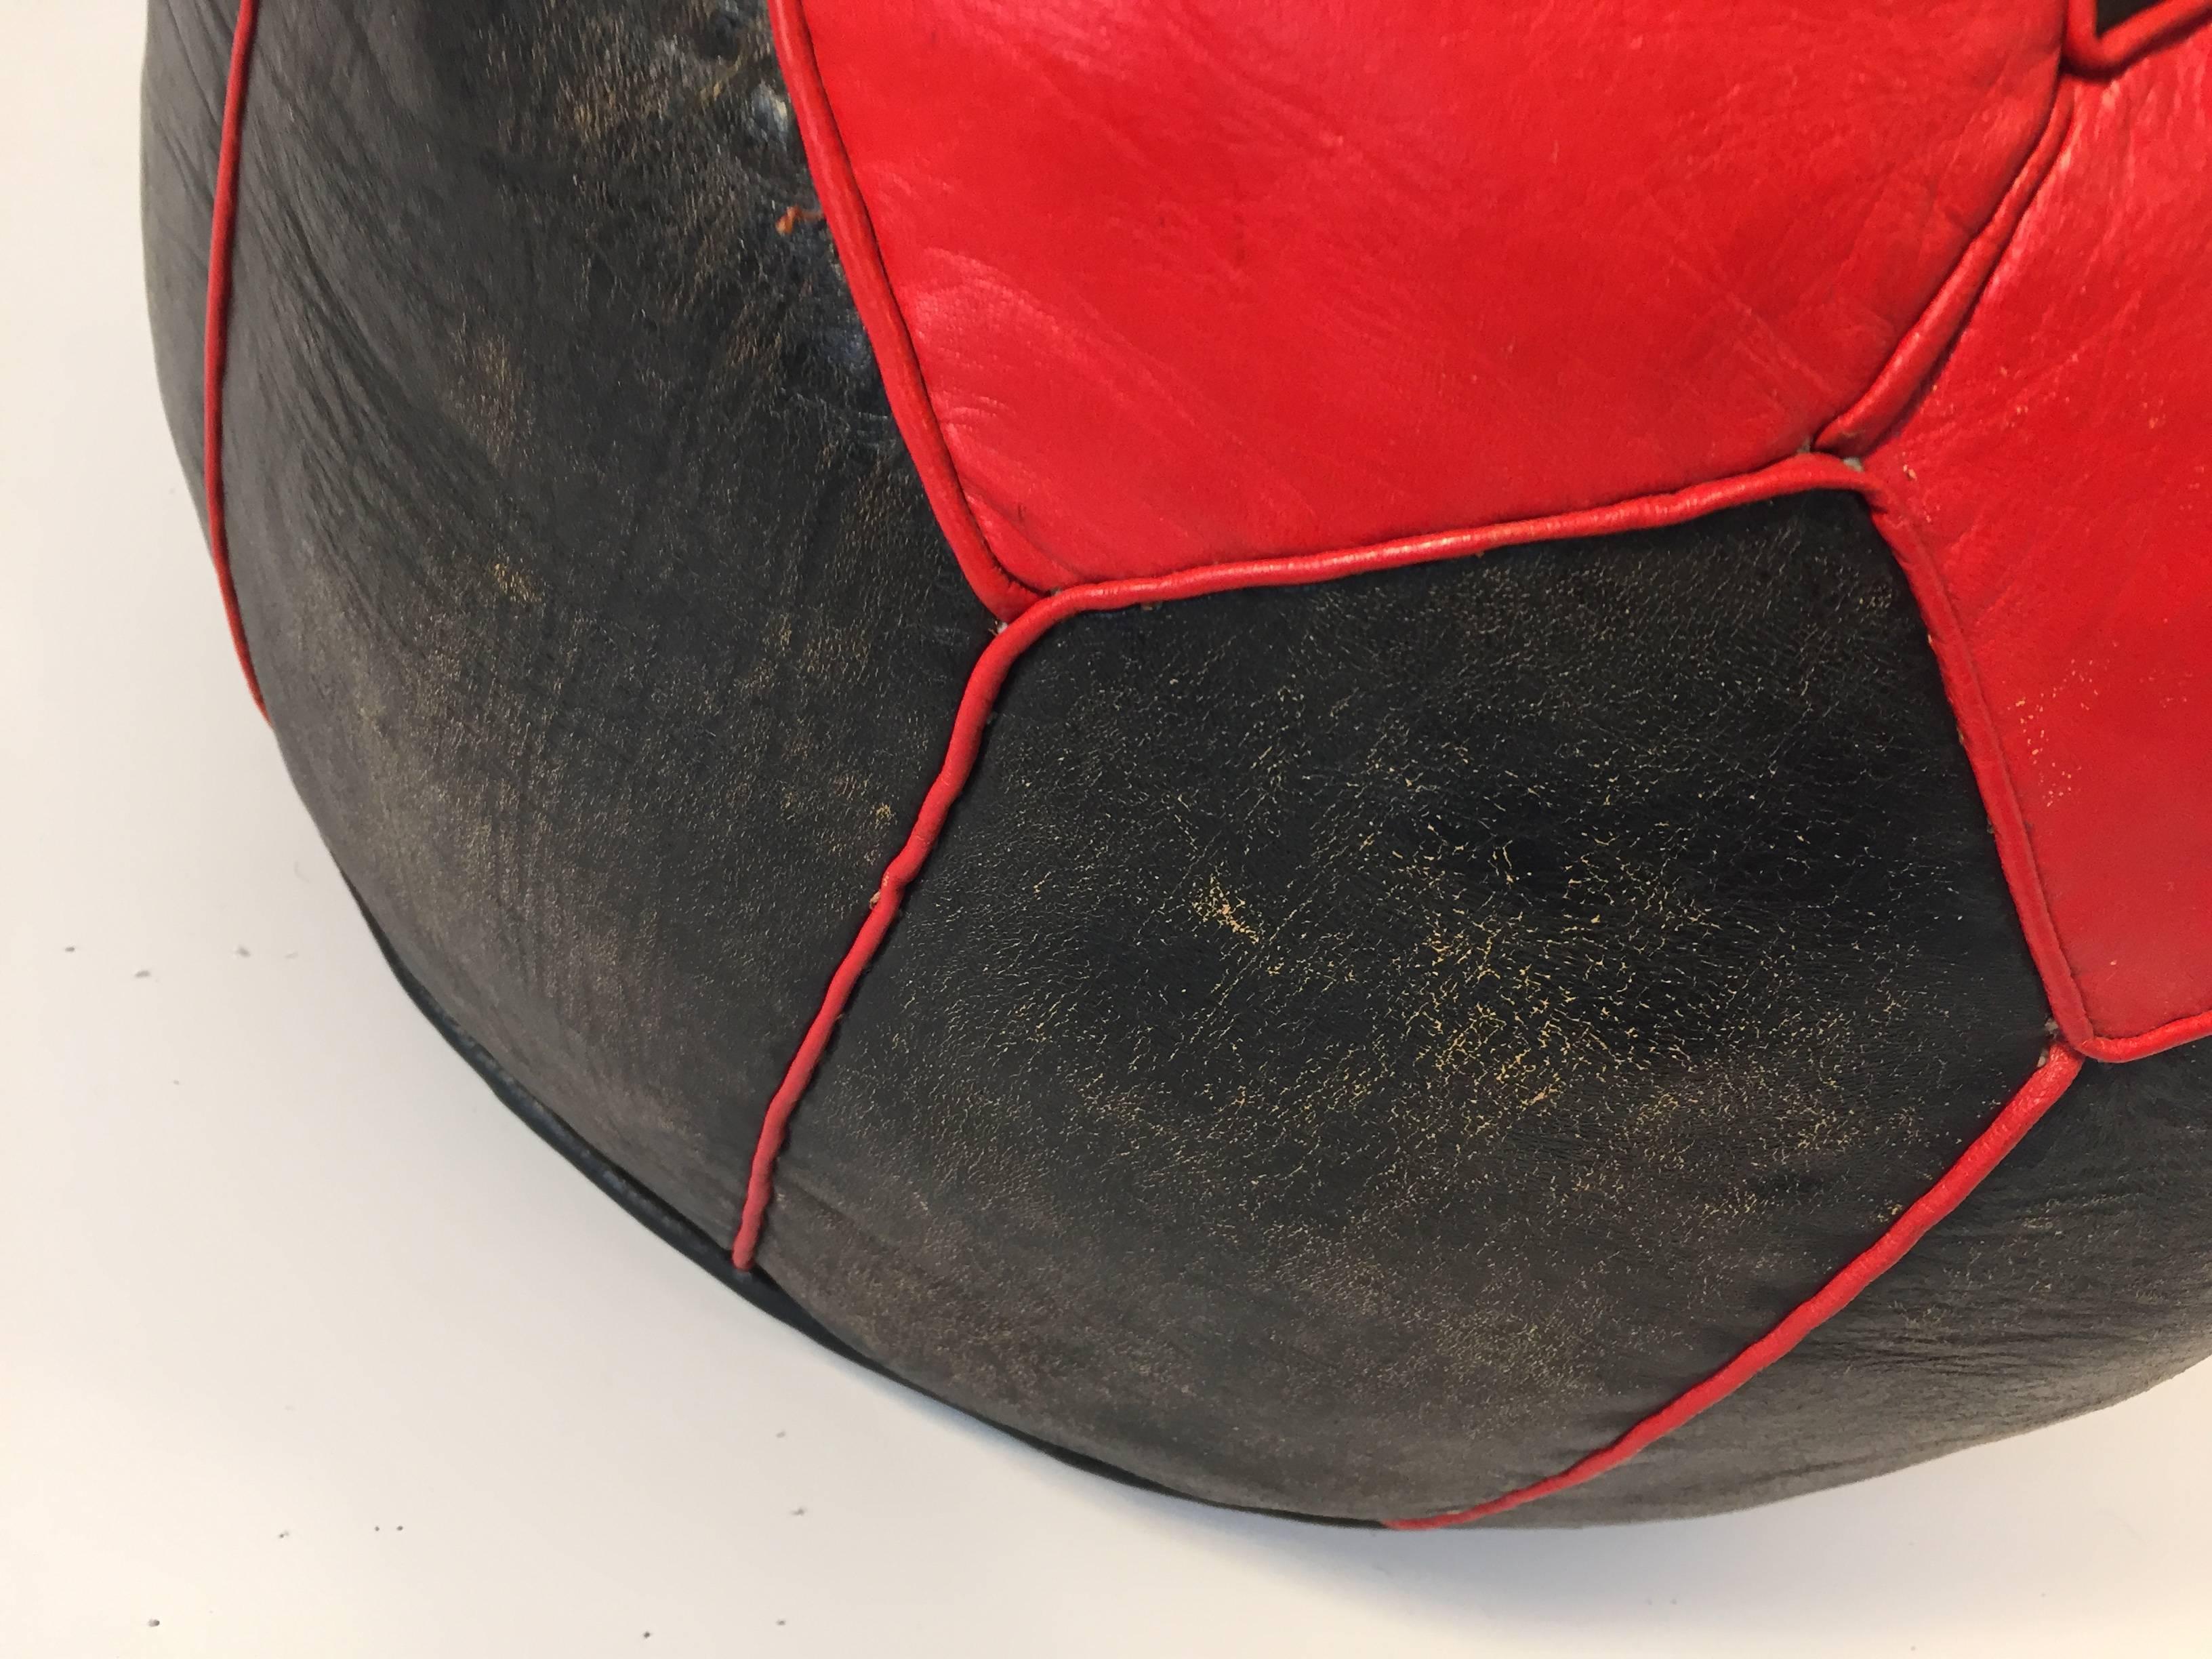 Moroccan Vintage Round Leather Pouf Red and Black 1